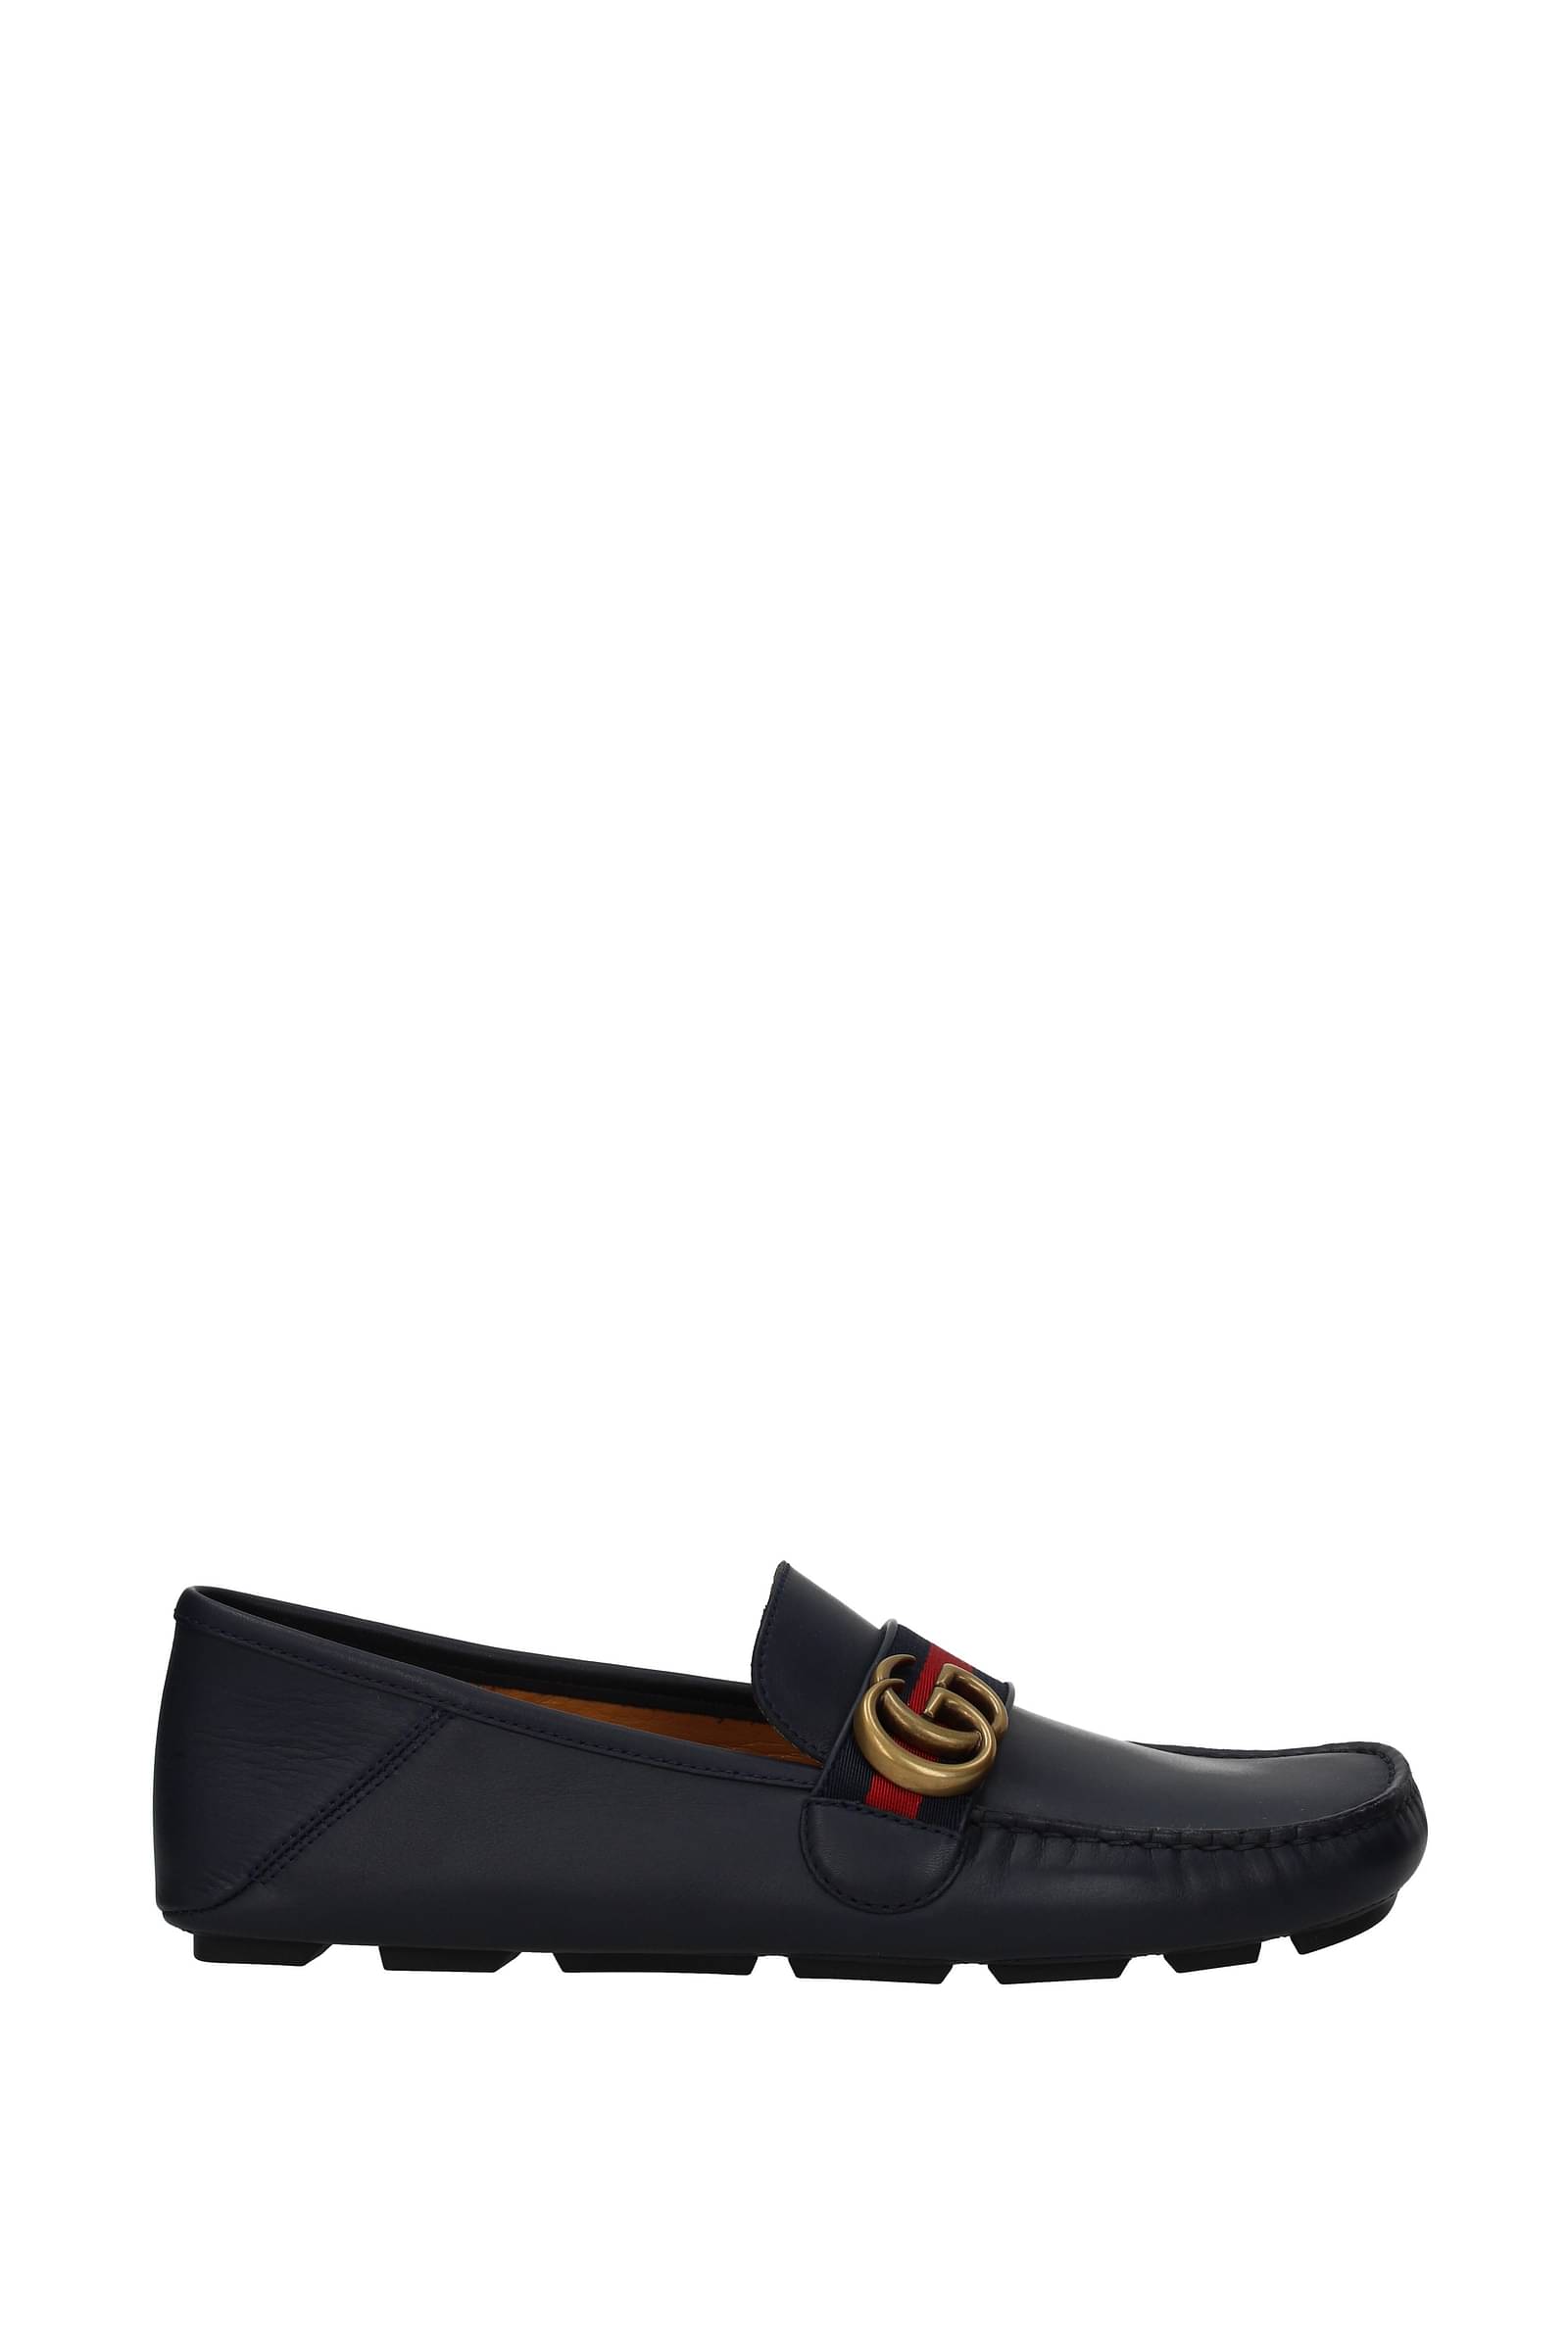 gucci loafers men cheap